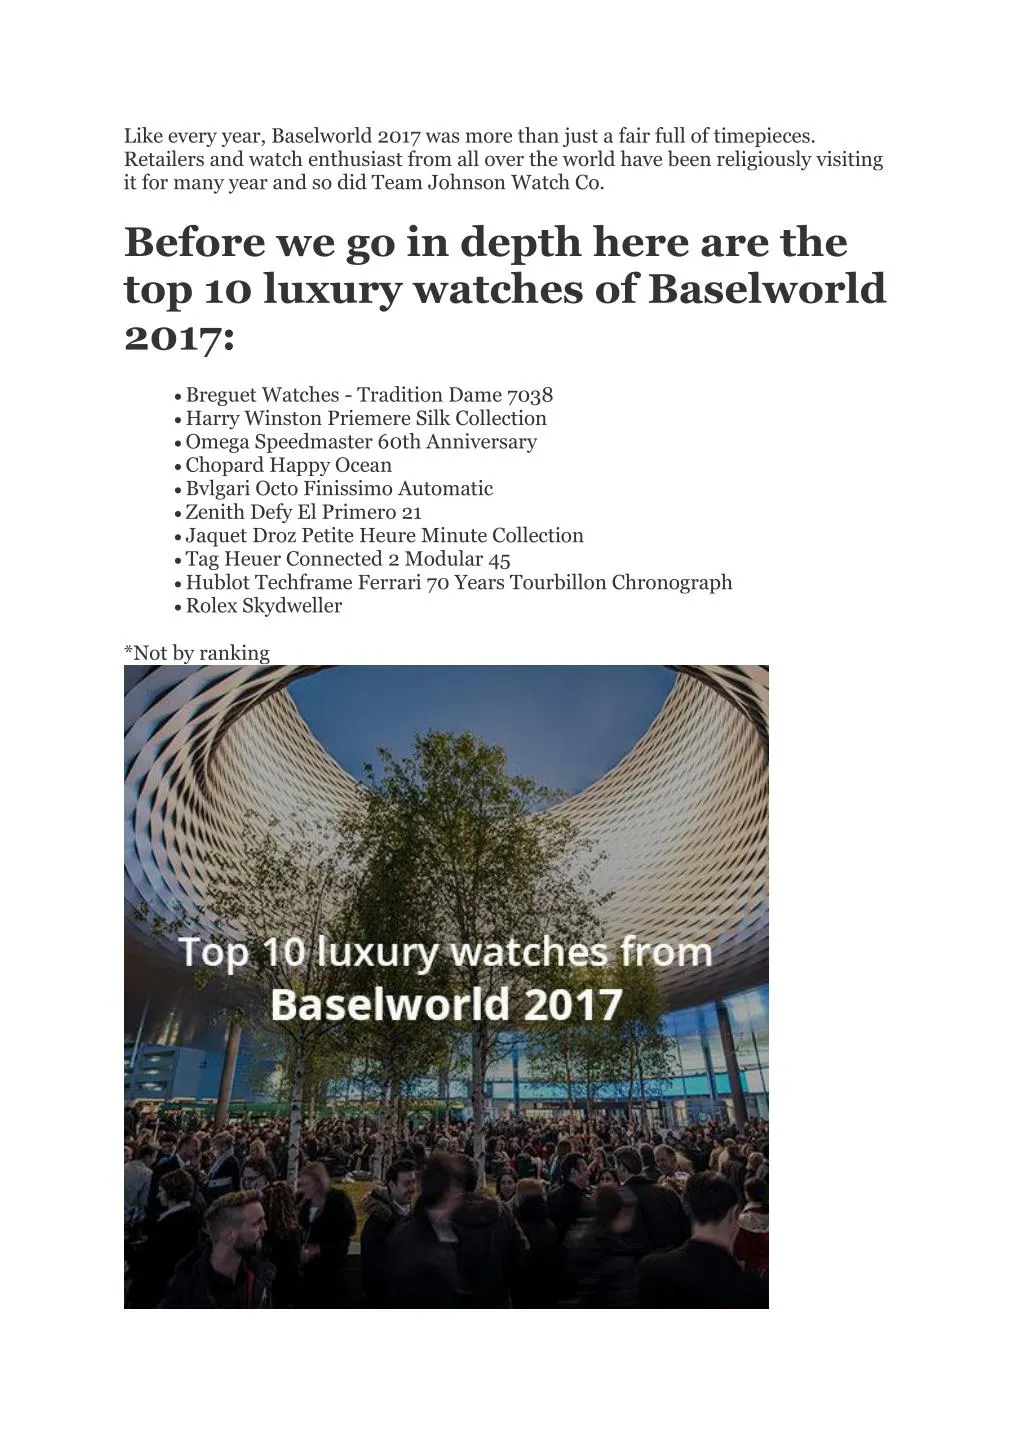 like every year baselworld 2017 was more than